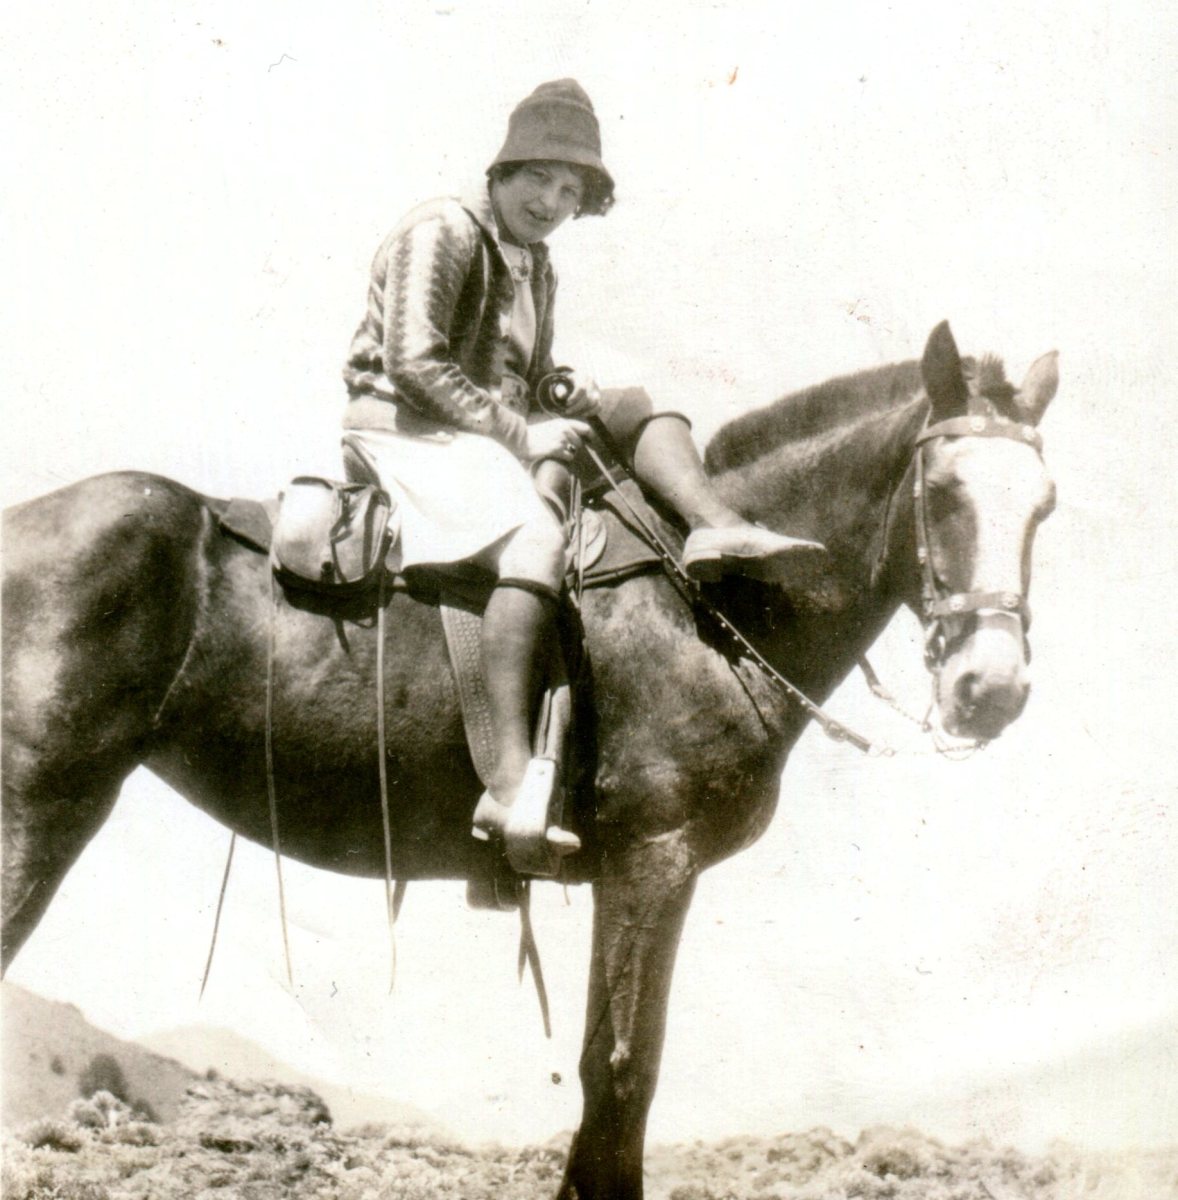 An example of a woman riding sidesaddle using a standard saddle with one horn.